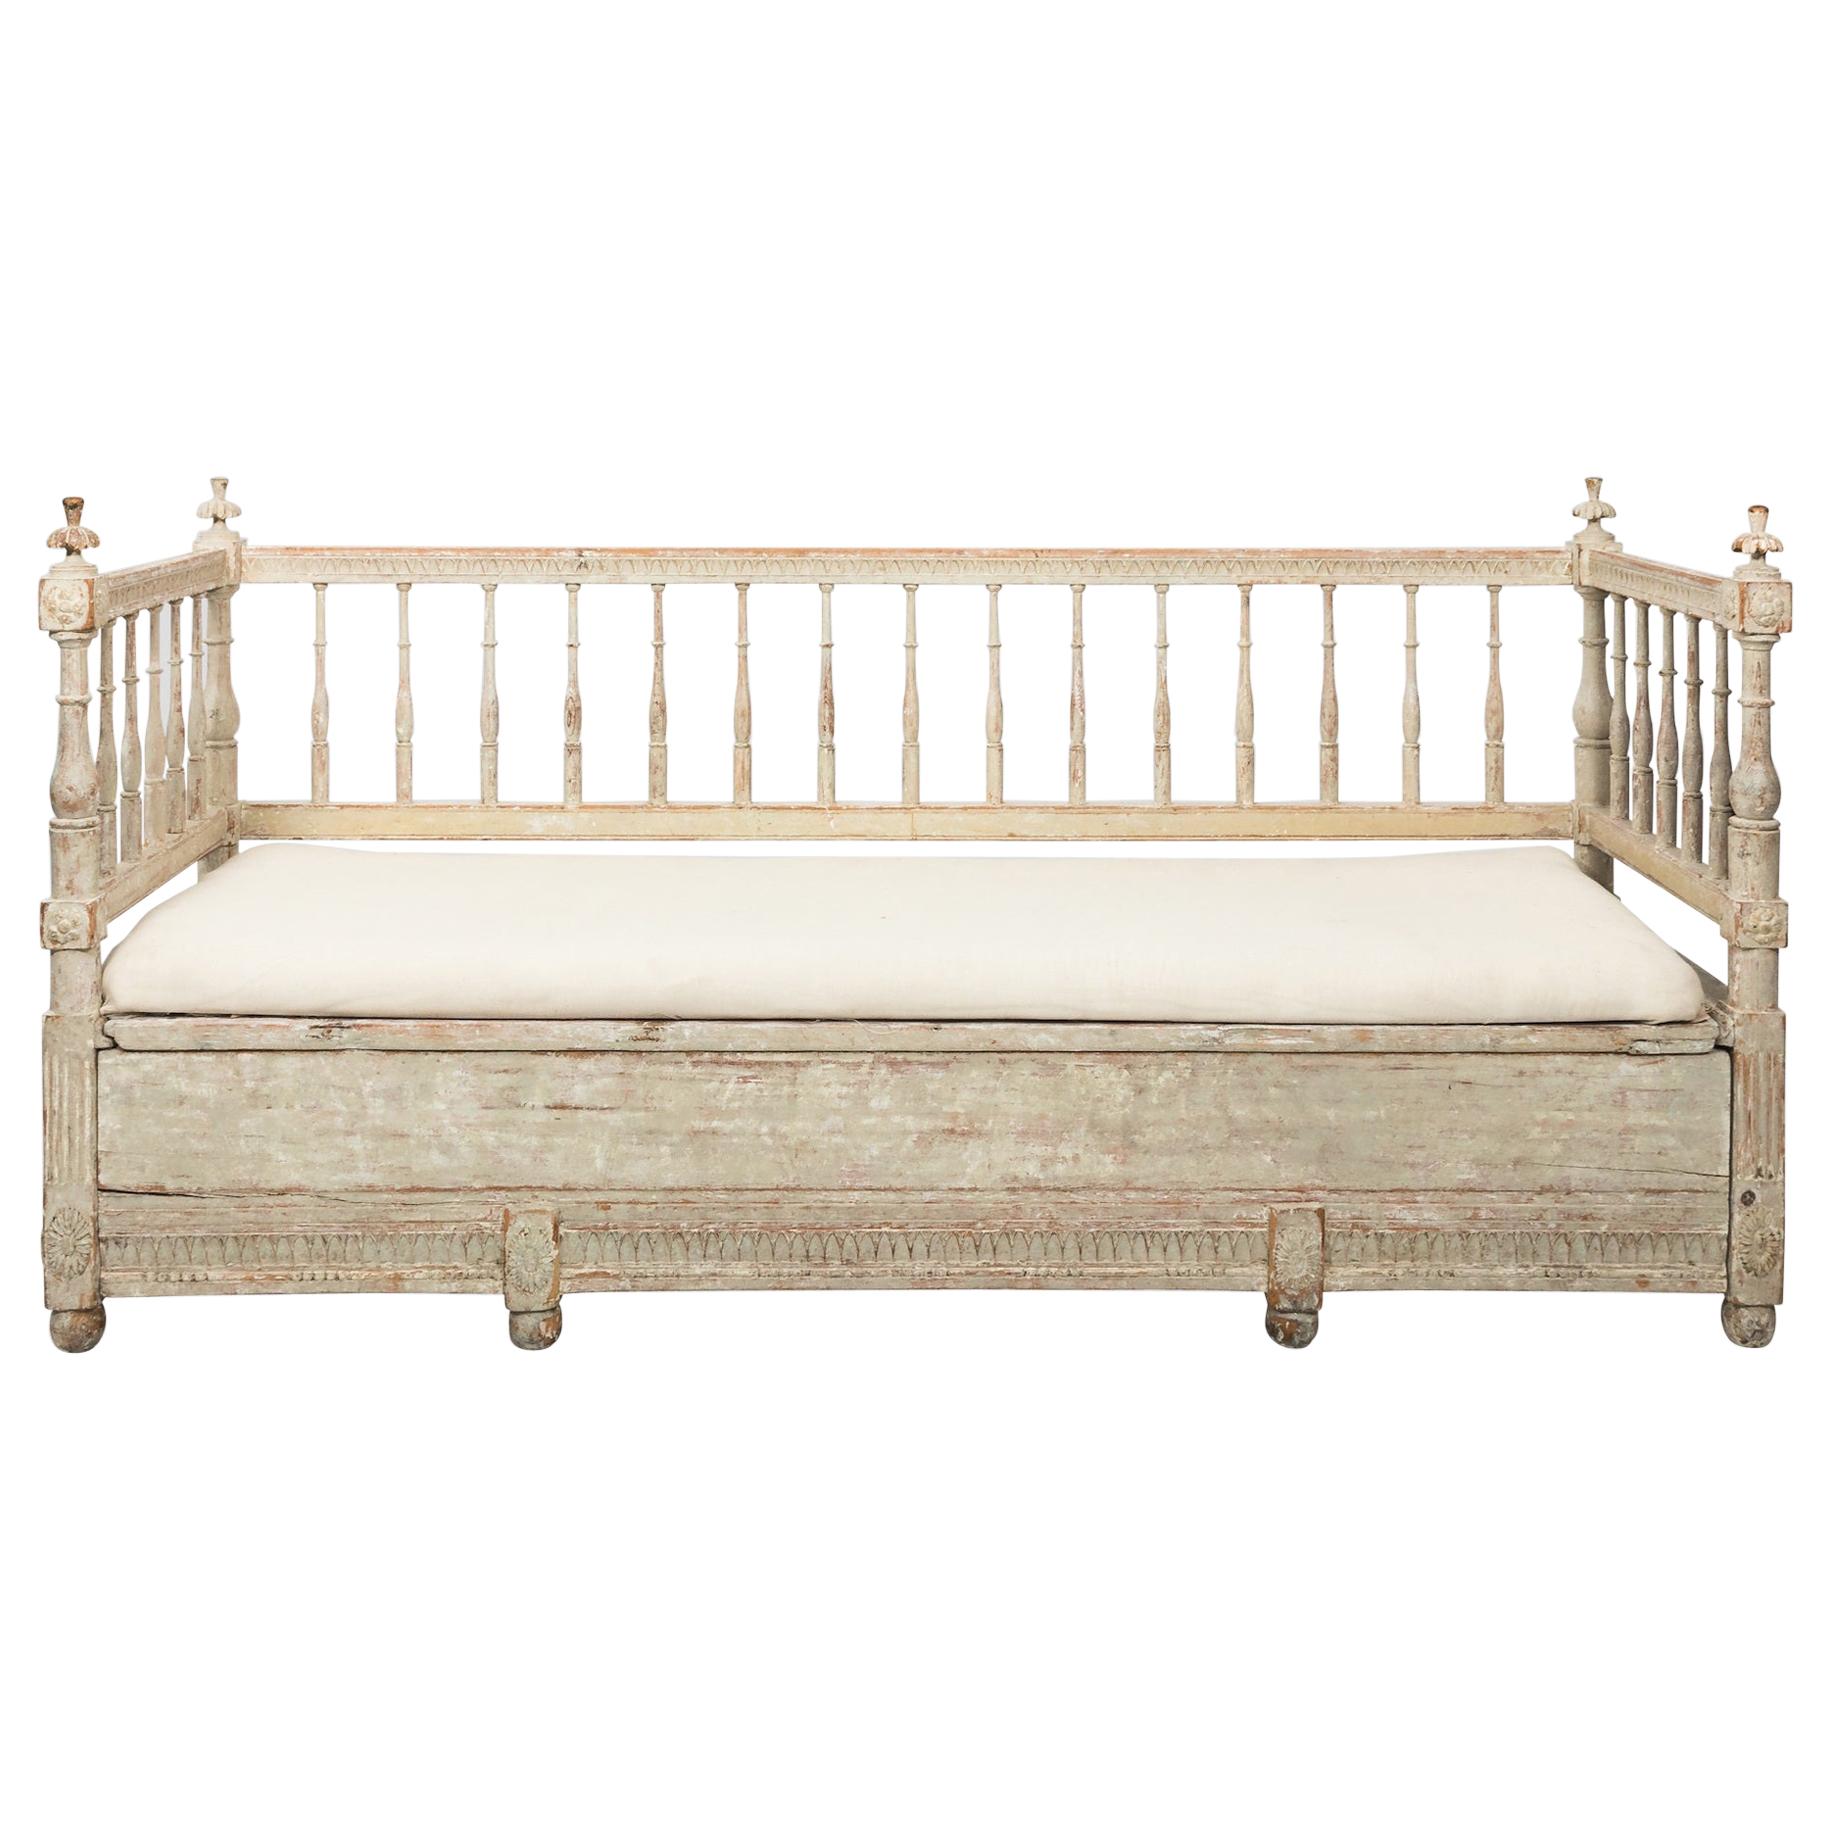 Late 18th Century Gustavian Painted White Daybed Sofa